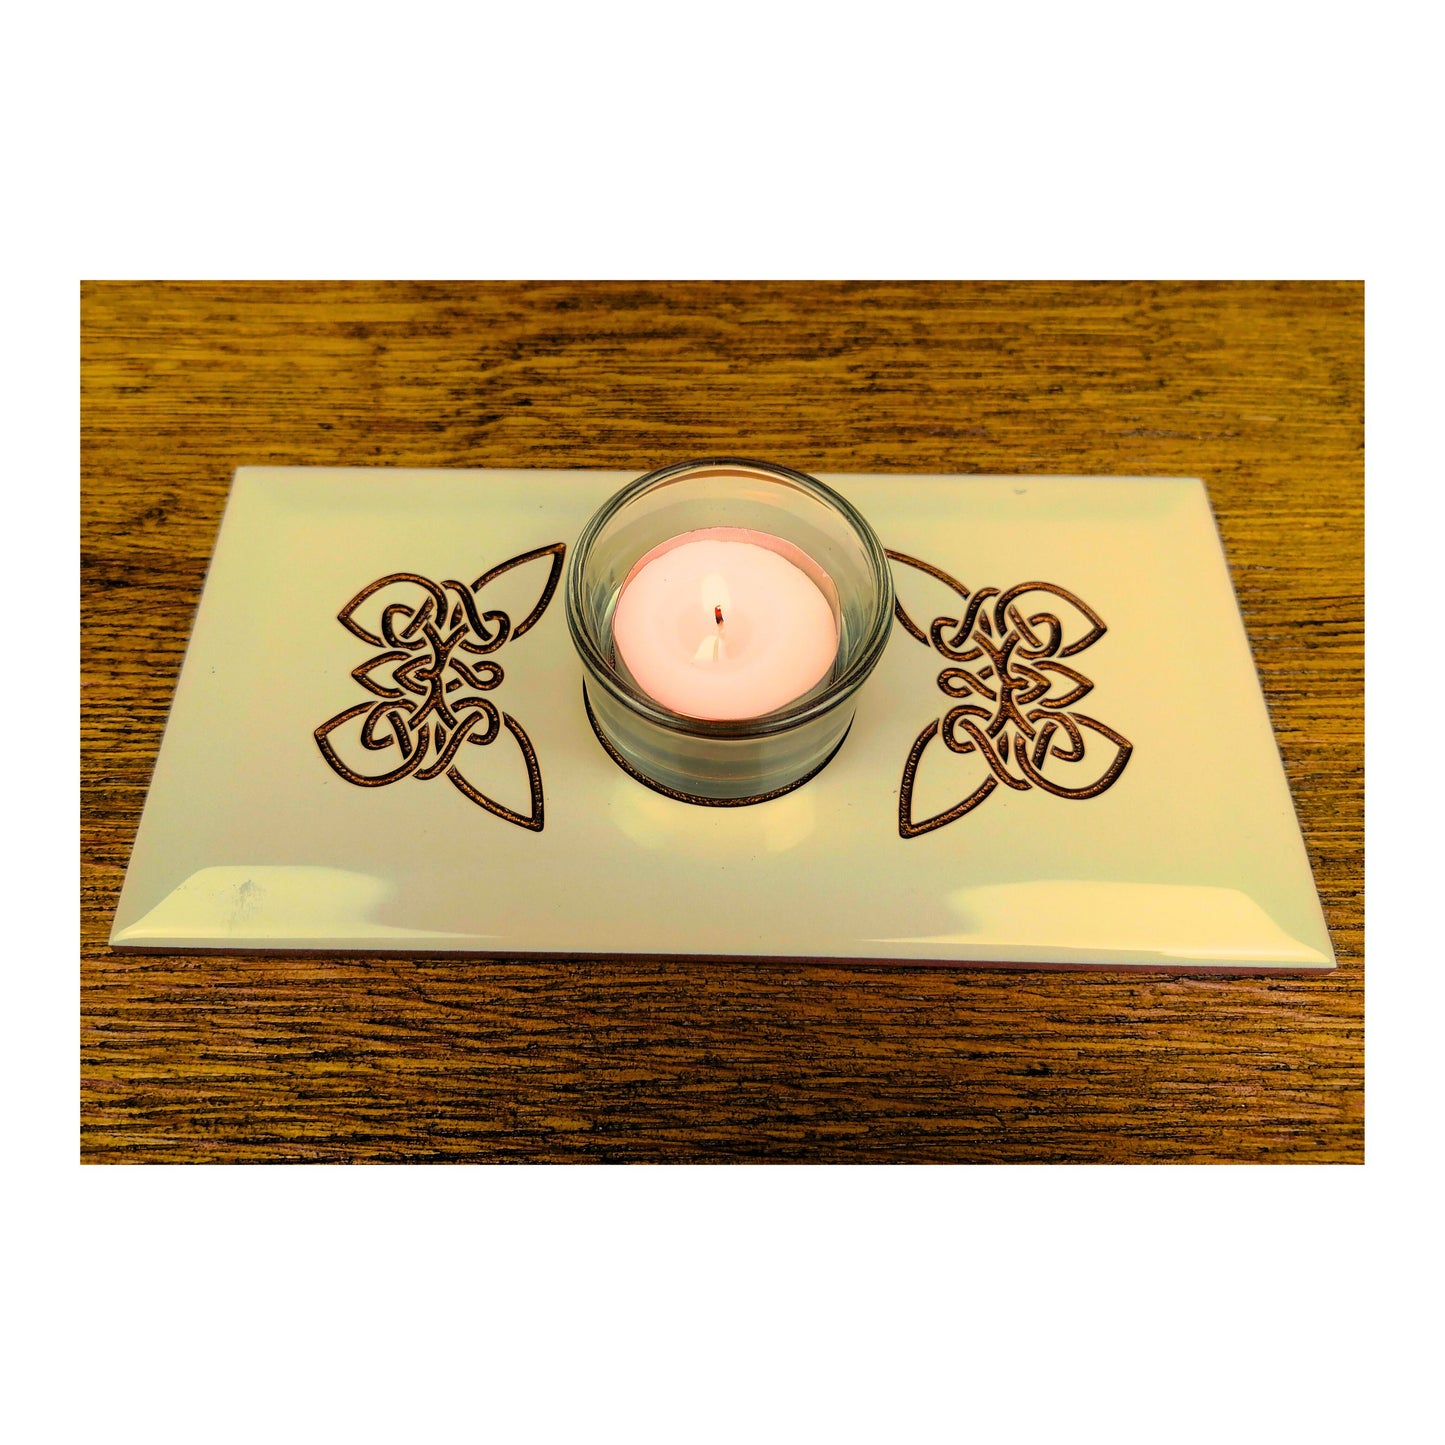 Handmade Tealight Candle Holder | Deep Engraved Ceramic Tile | Unique Gift Idea | Made In Ireland | Gold Copper Silver | Modern Home Decor